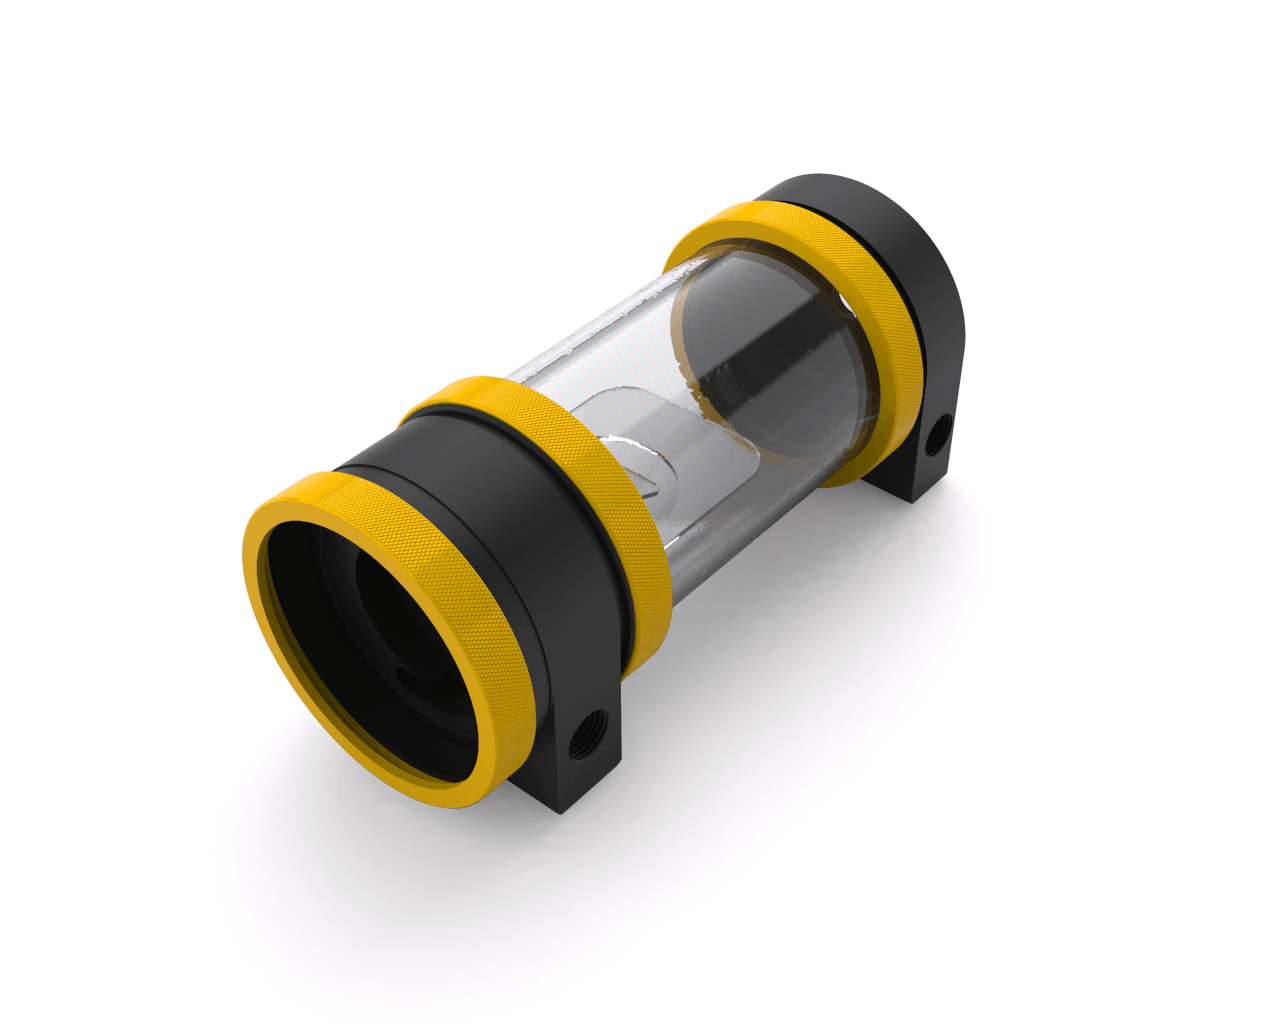 PrimoChill CTR Hard Mount Phase II High Flow D5 Enabled Reservoir - Black POM - 120mm - PrimoChill - KEEPING IT COOL Yellow